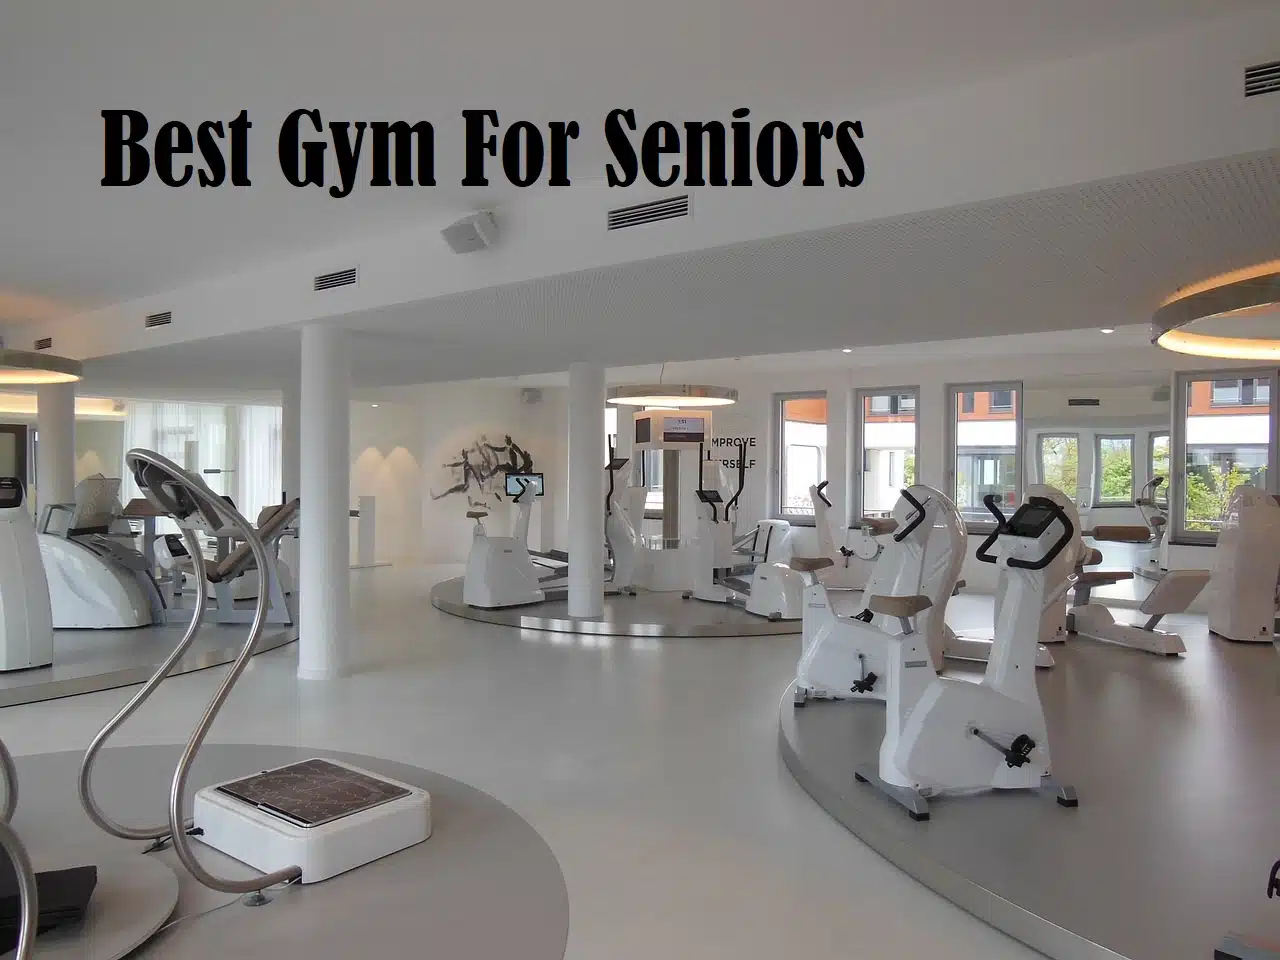 A picture of a gym with the title Best Gym For Seniors